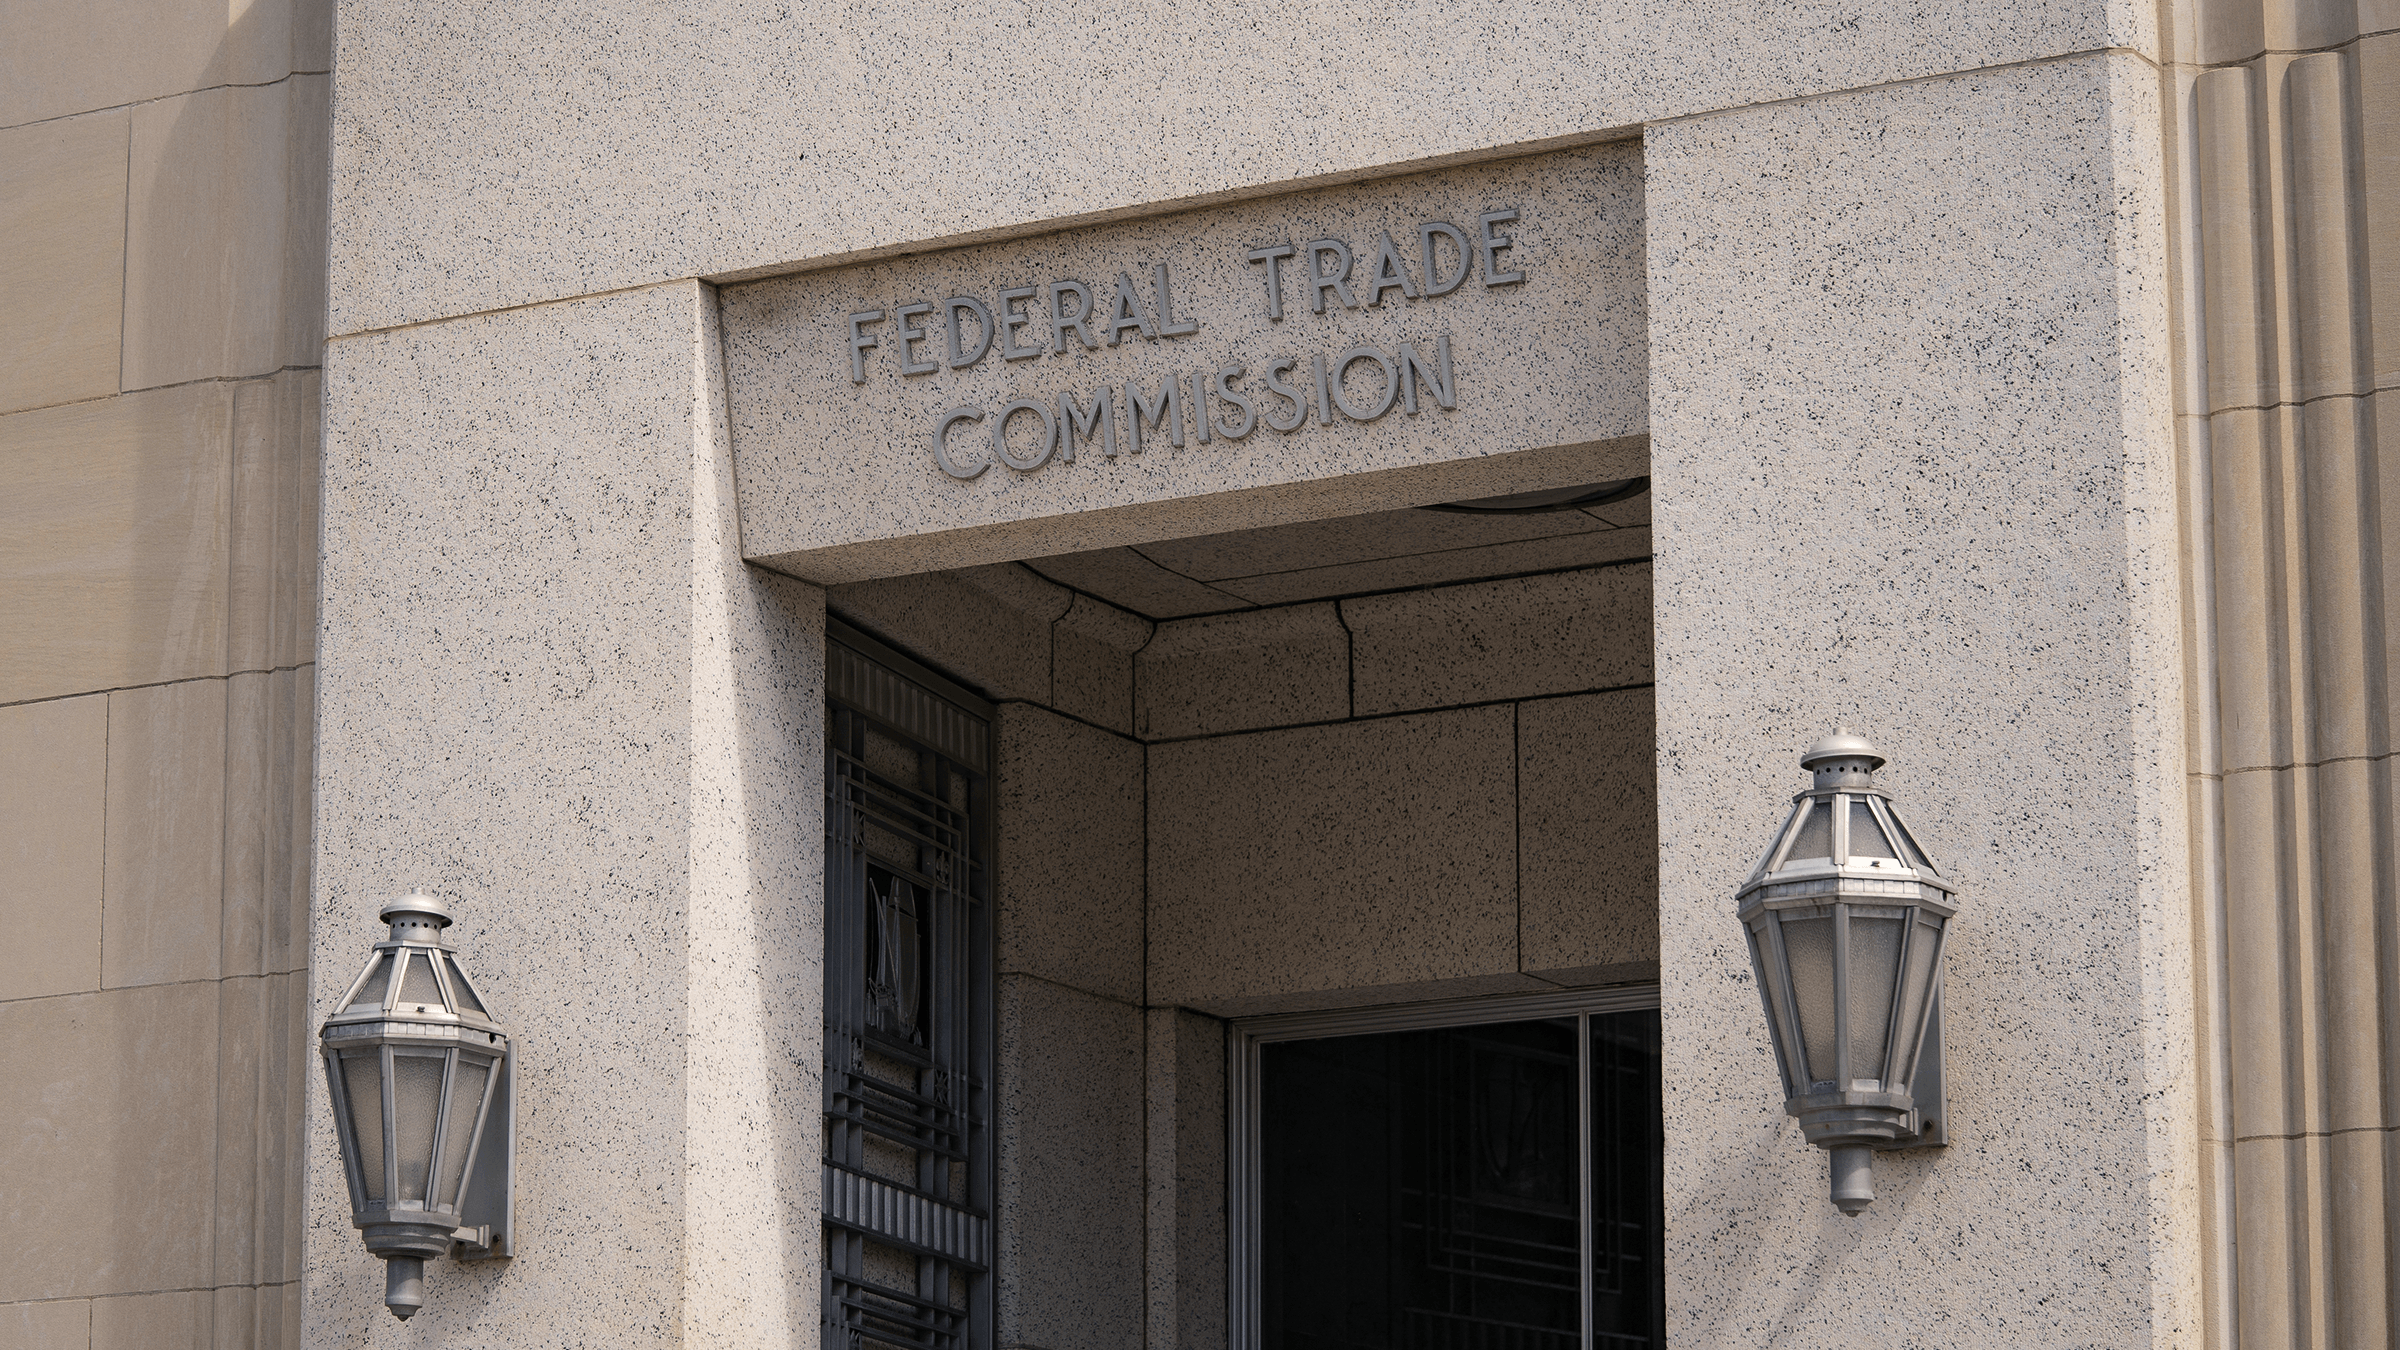 An image of the front door of the Federal Trade Commission building, Pennsylvania Avenue, Washington DC